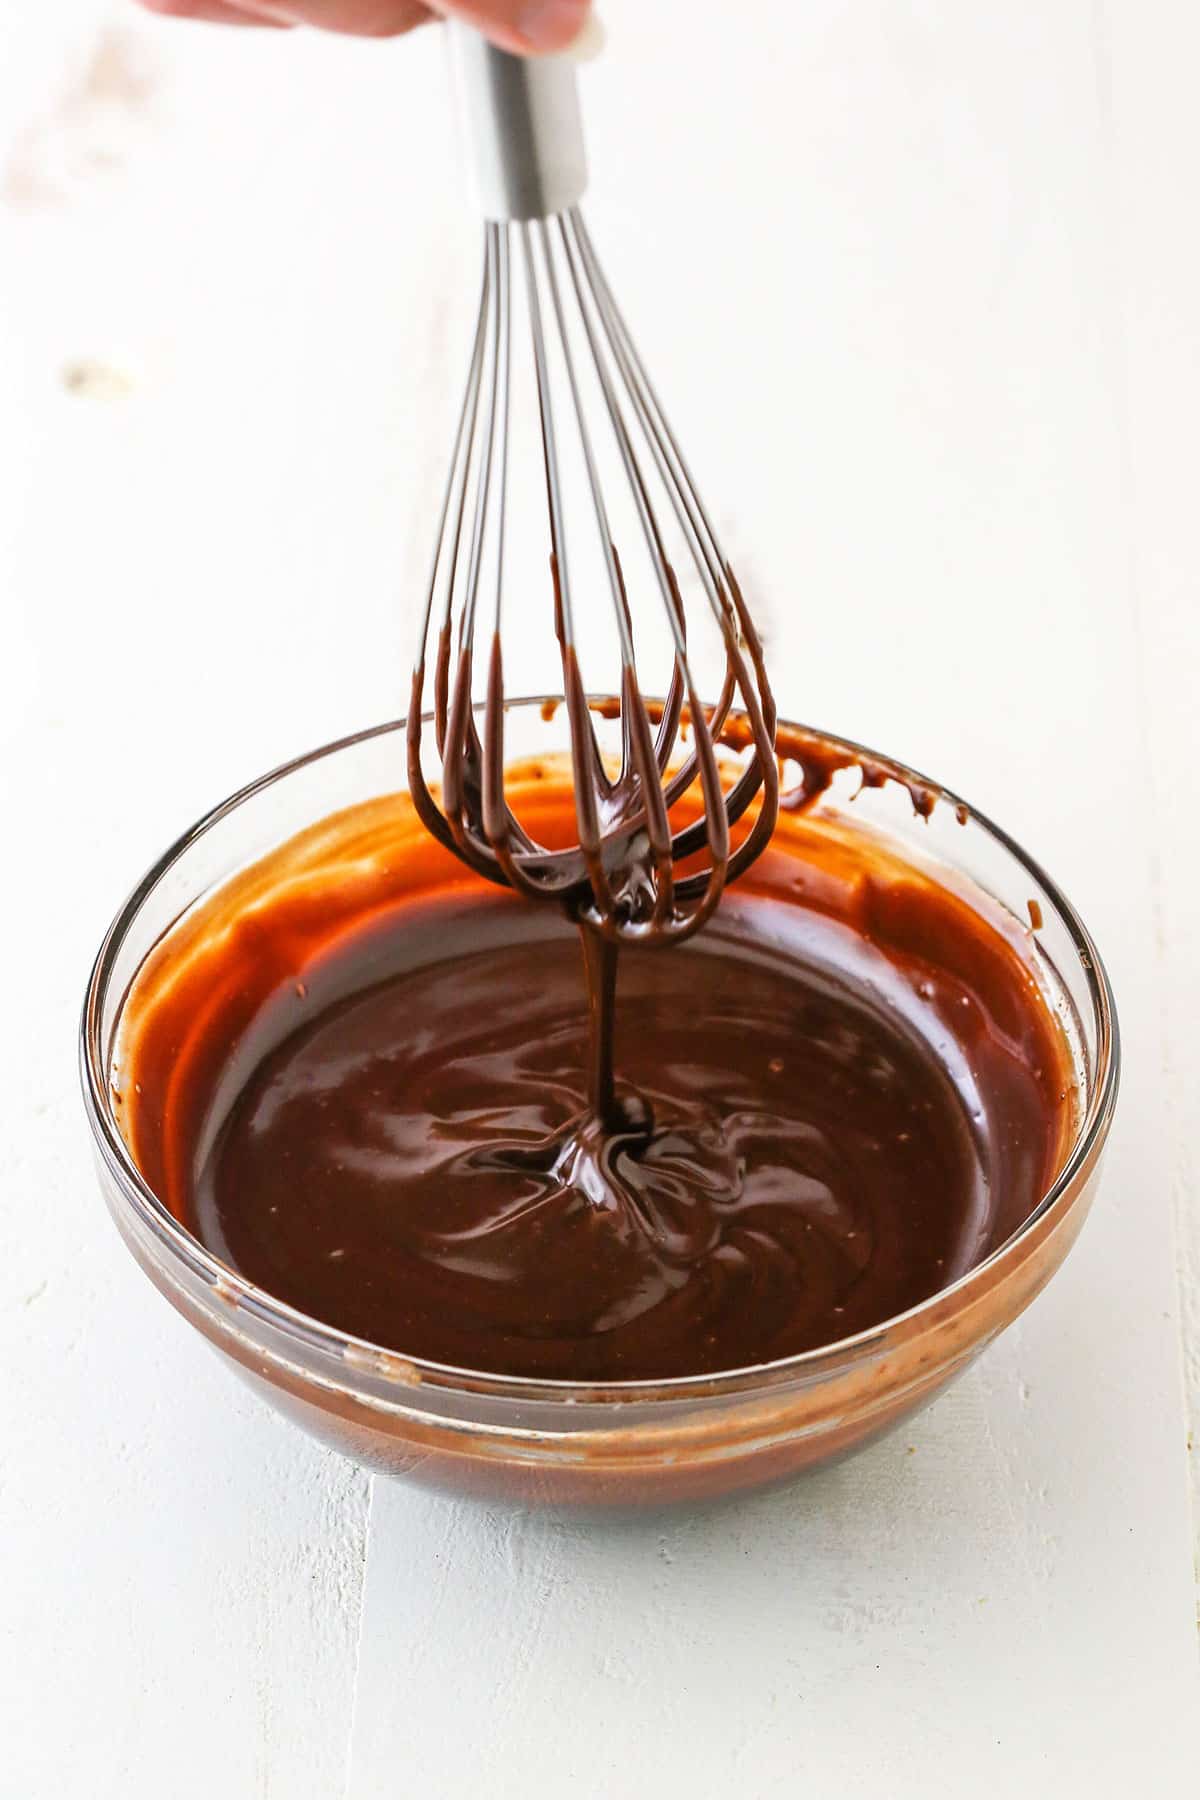 Dripping chocolate ganache off a whisk into a clear glass bowl